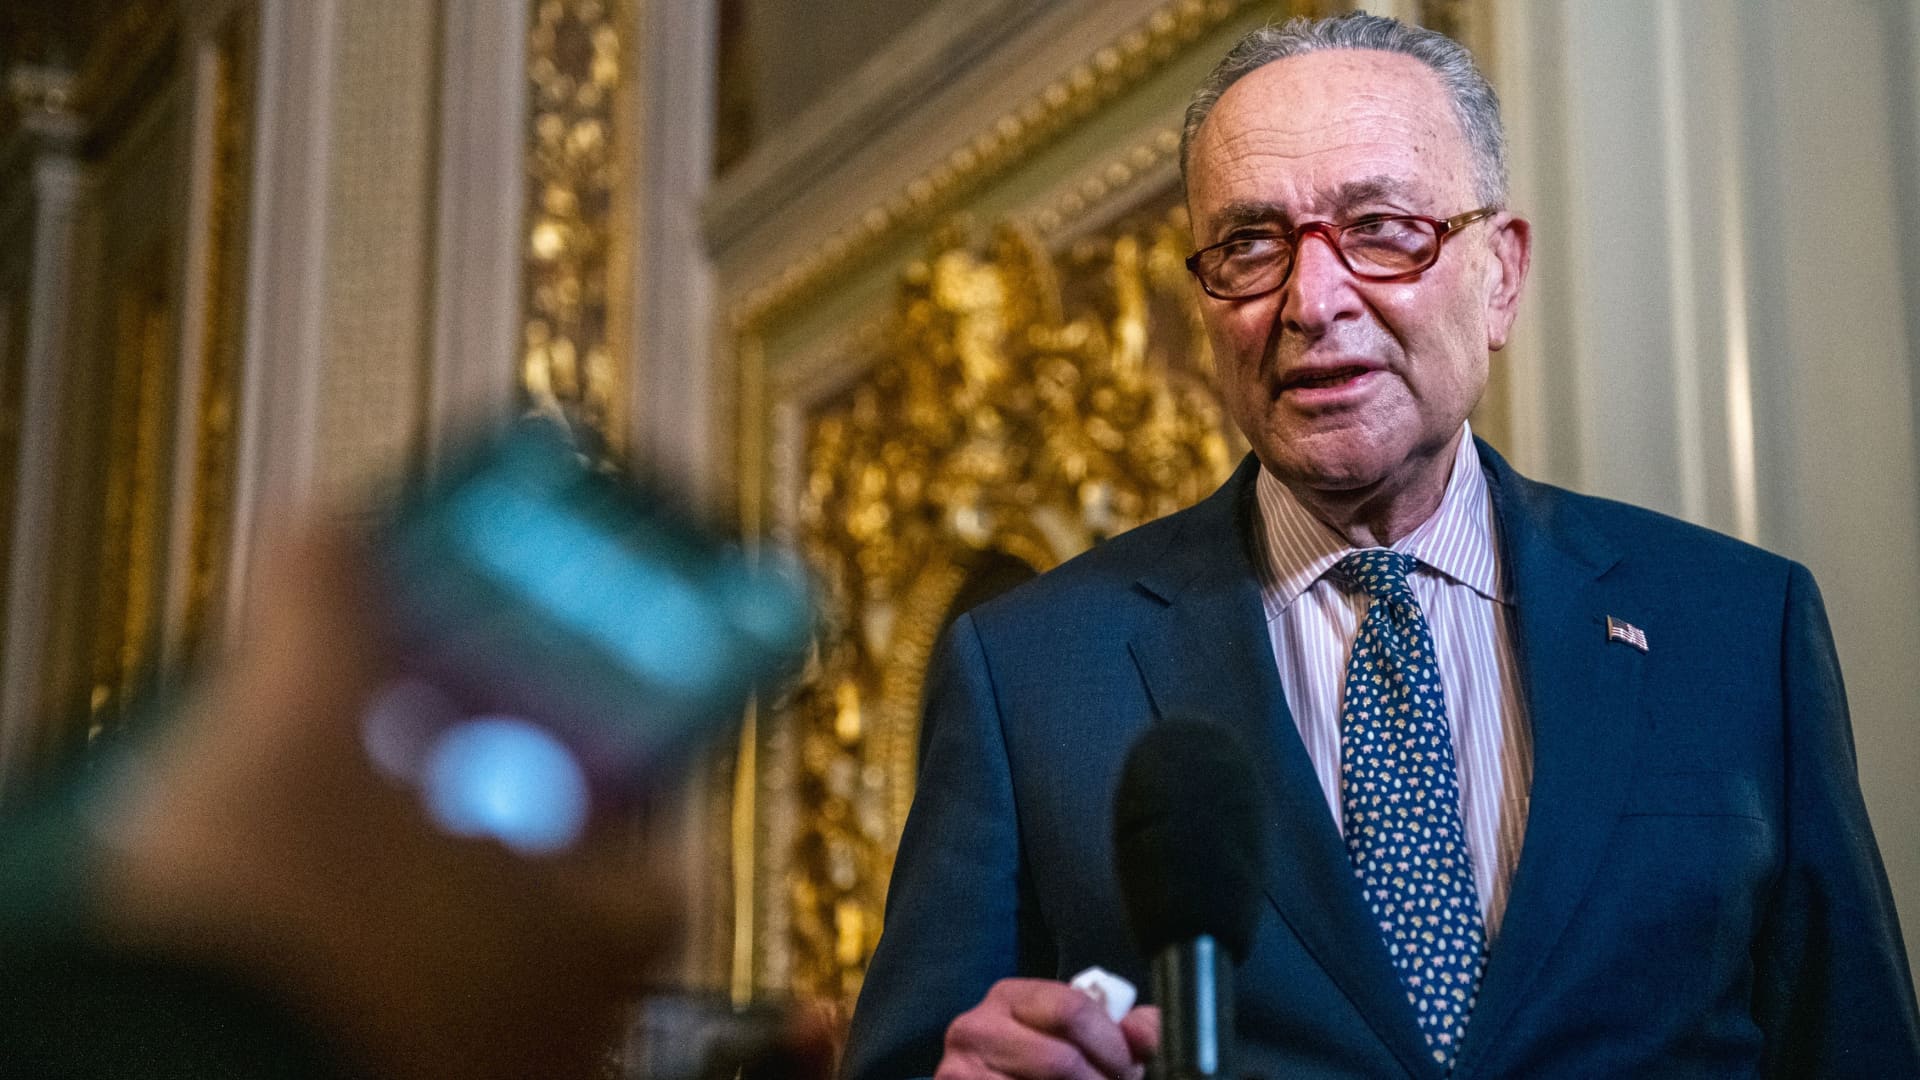 U.S. Senate Majority Leader Chuck Schumer (D-NY) speaks to reporters in The Senate Reception Room during the second day of Trump's second impeachment trial in Washington, February 10, 2021.